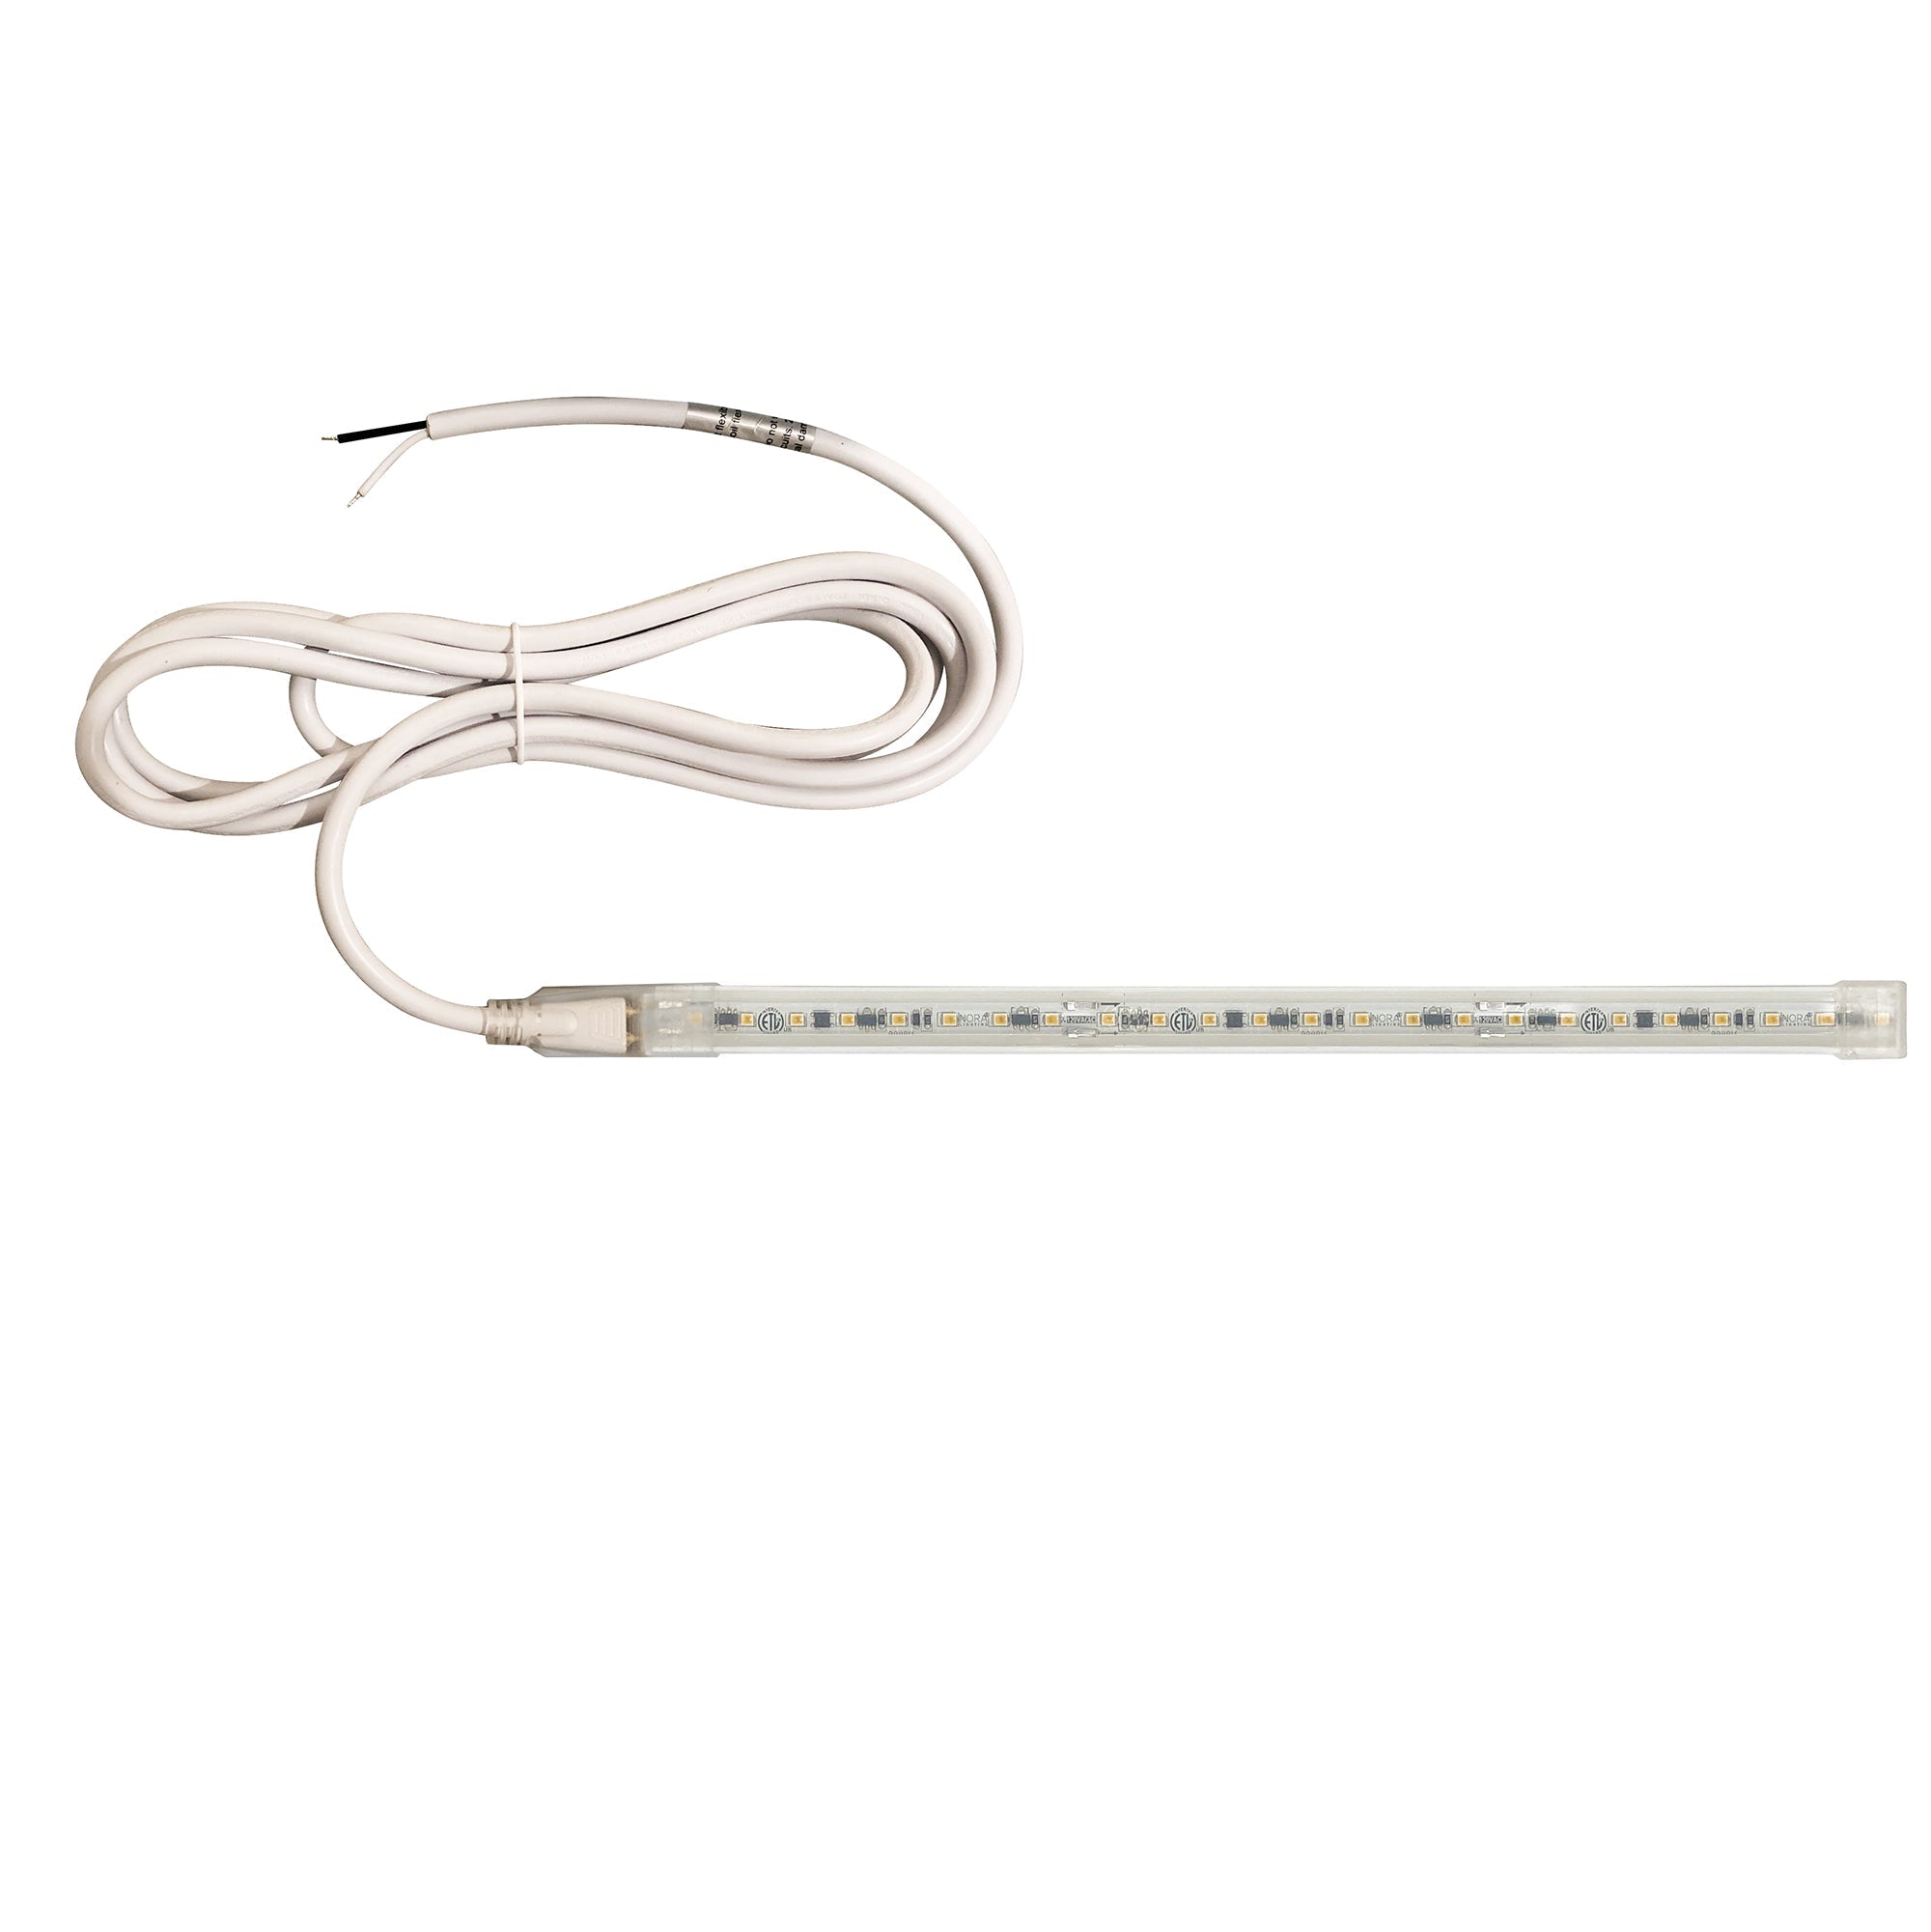 Nora Lighting NUTP13-W46-12-940/HW - Accent / Undercabinet - Custom Cut 46-ft 120V Continuous LED Tape Light, 330lm / 3.6W per foot, 4000K, w/ Mounting Clips and 8' Hardwired Power Cord